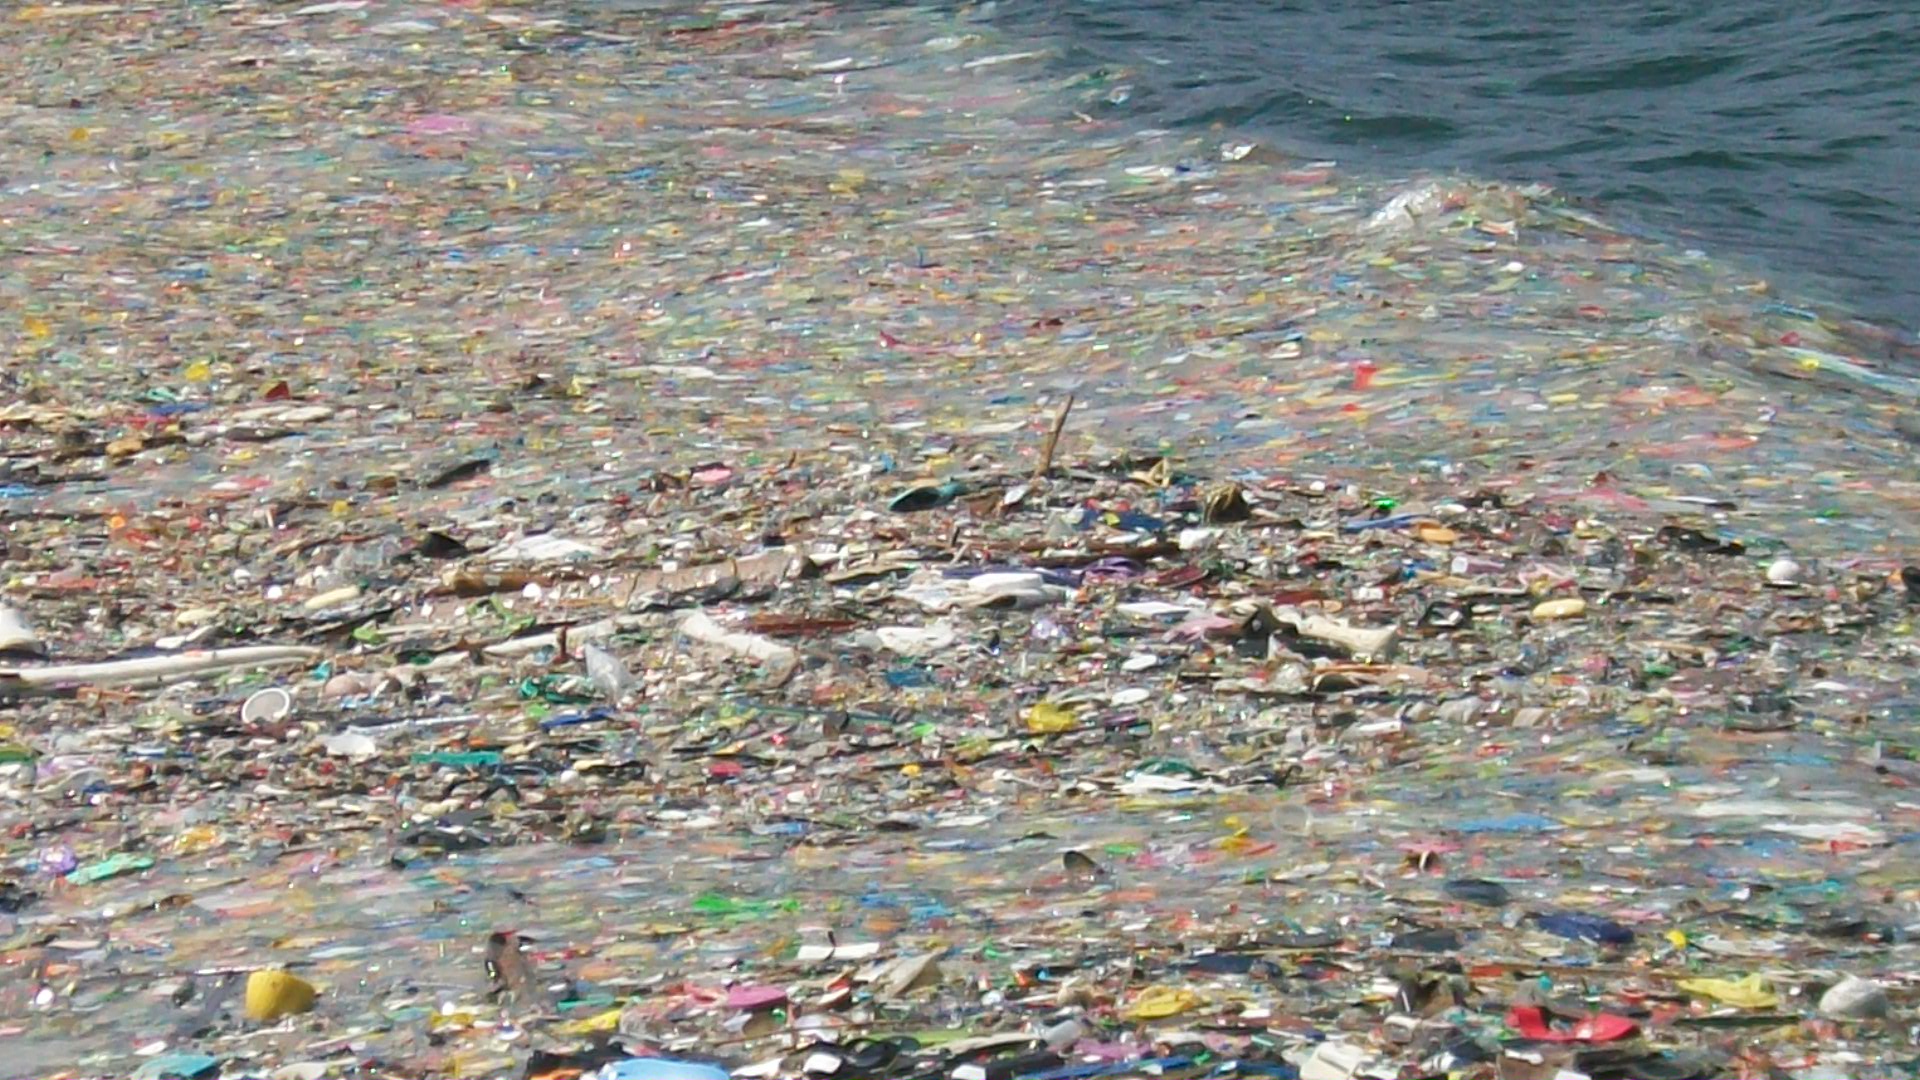 Pacific Gyre Garbage Patch Facts